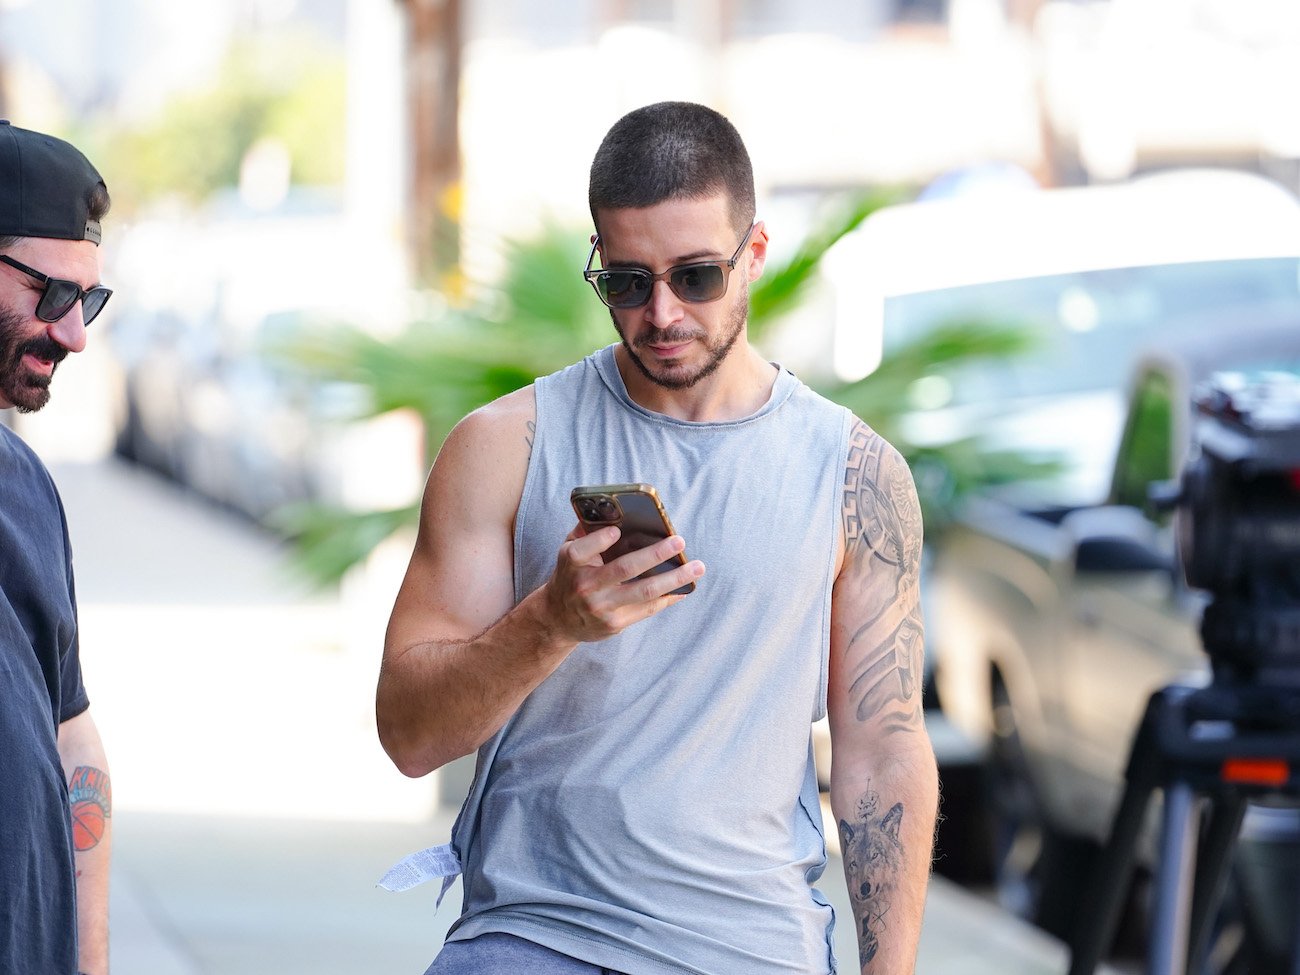 'Jersey Shore' star Vinny Guadagnino looks at his cell phone in Los Angeles, CA